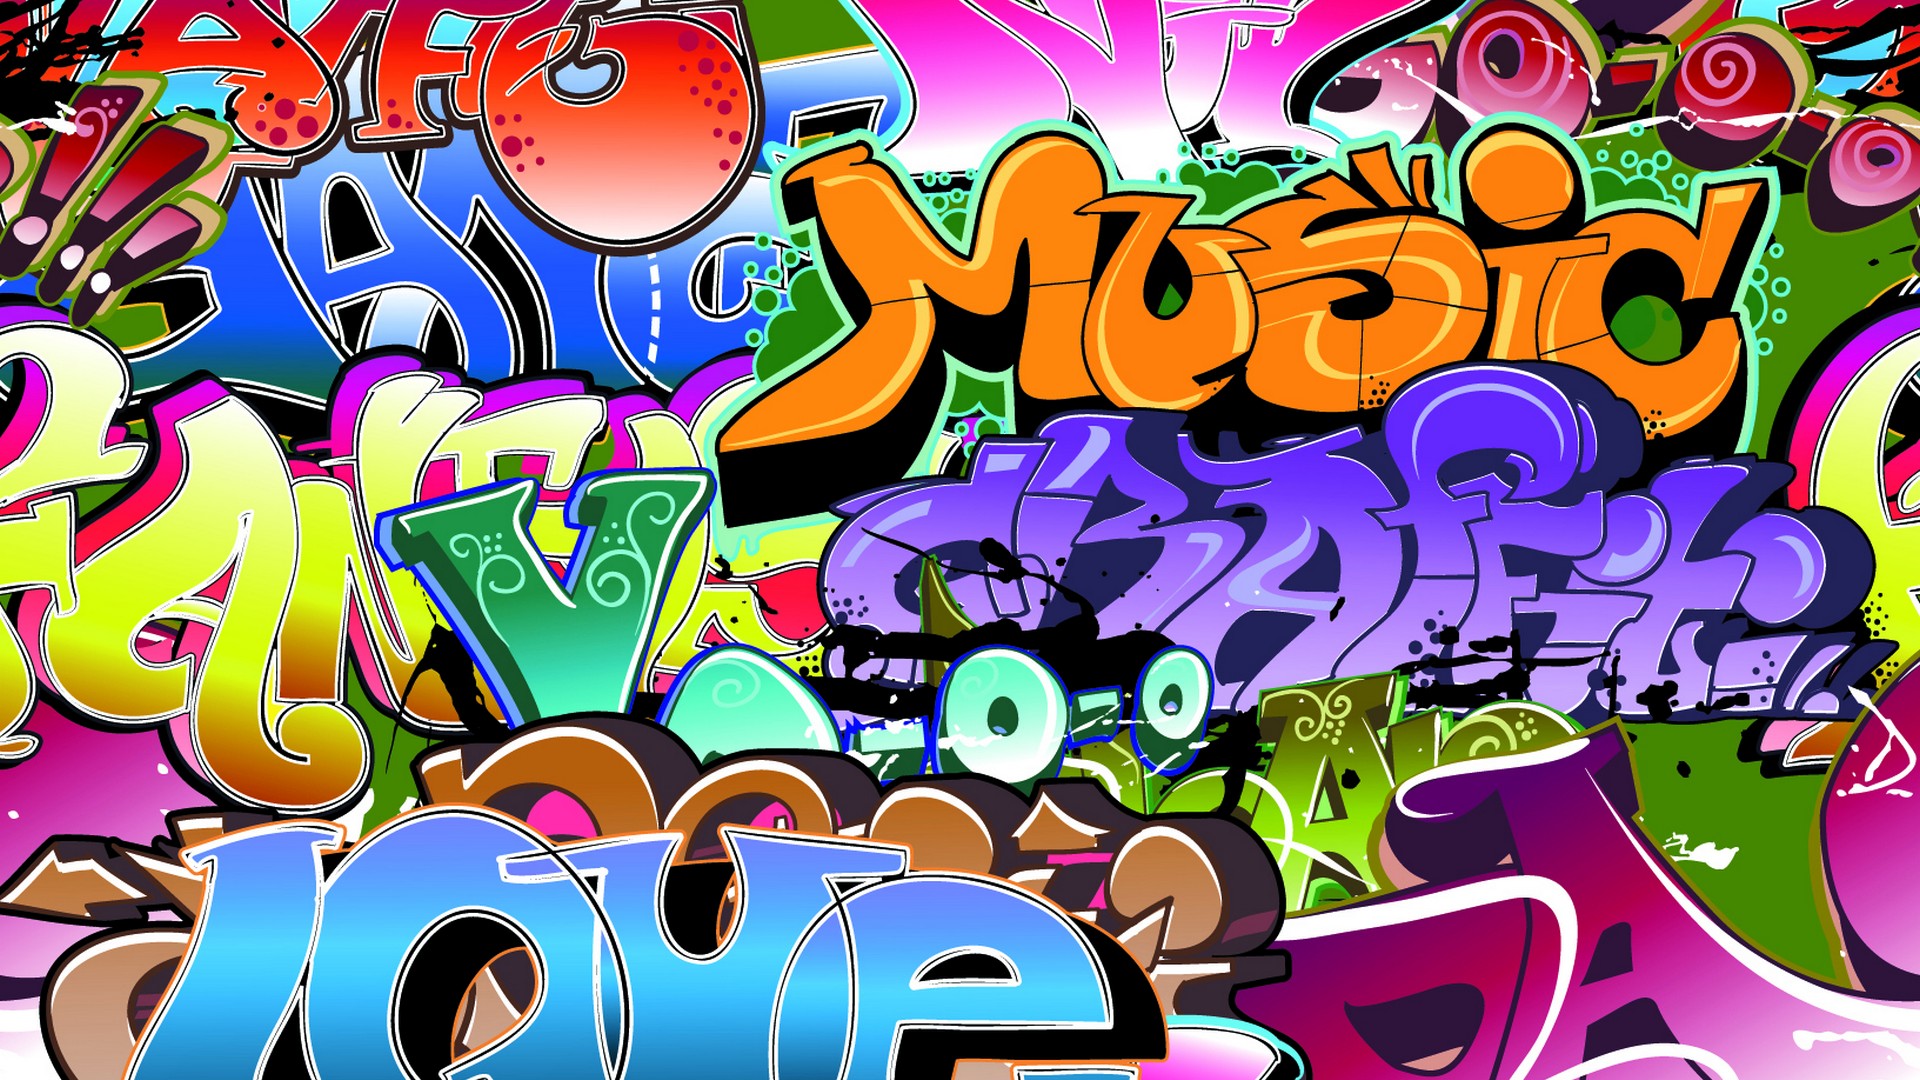 Best Graffiti Letters Wallpaper with image resolution 1920x1080 pixel. You can use this wallpaper as background for your desktop Computer Screensavers, Android or iPhone smartphones